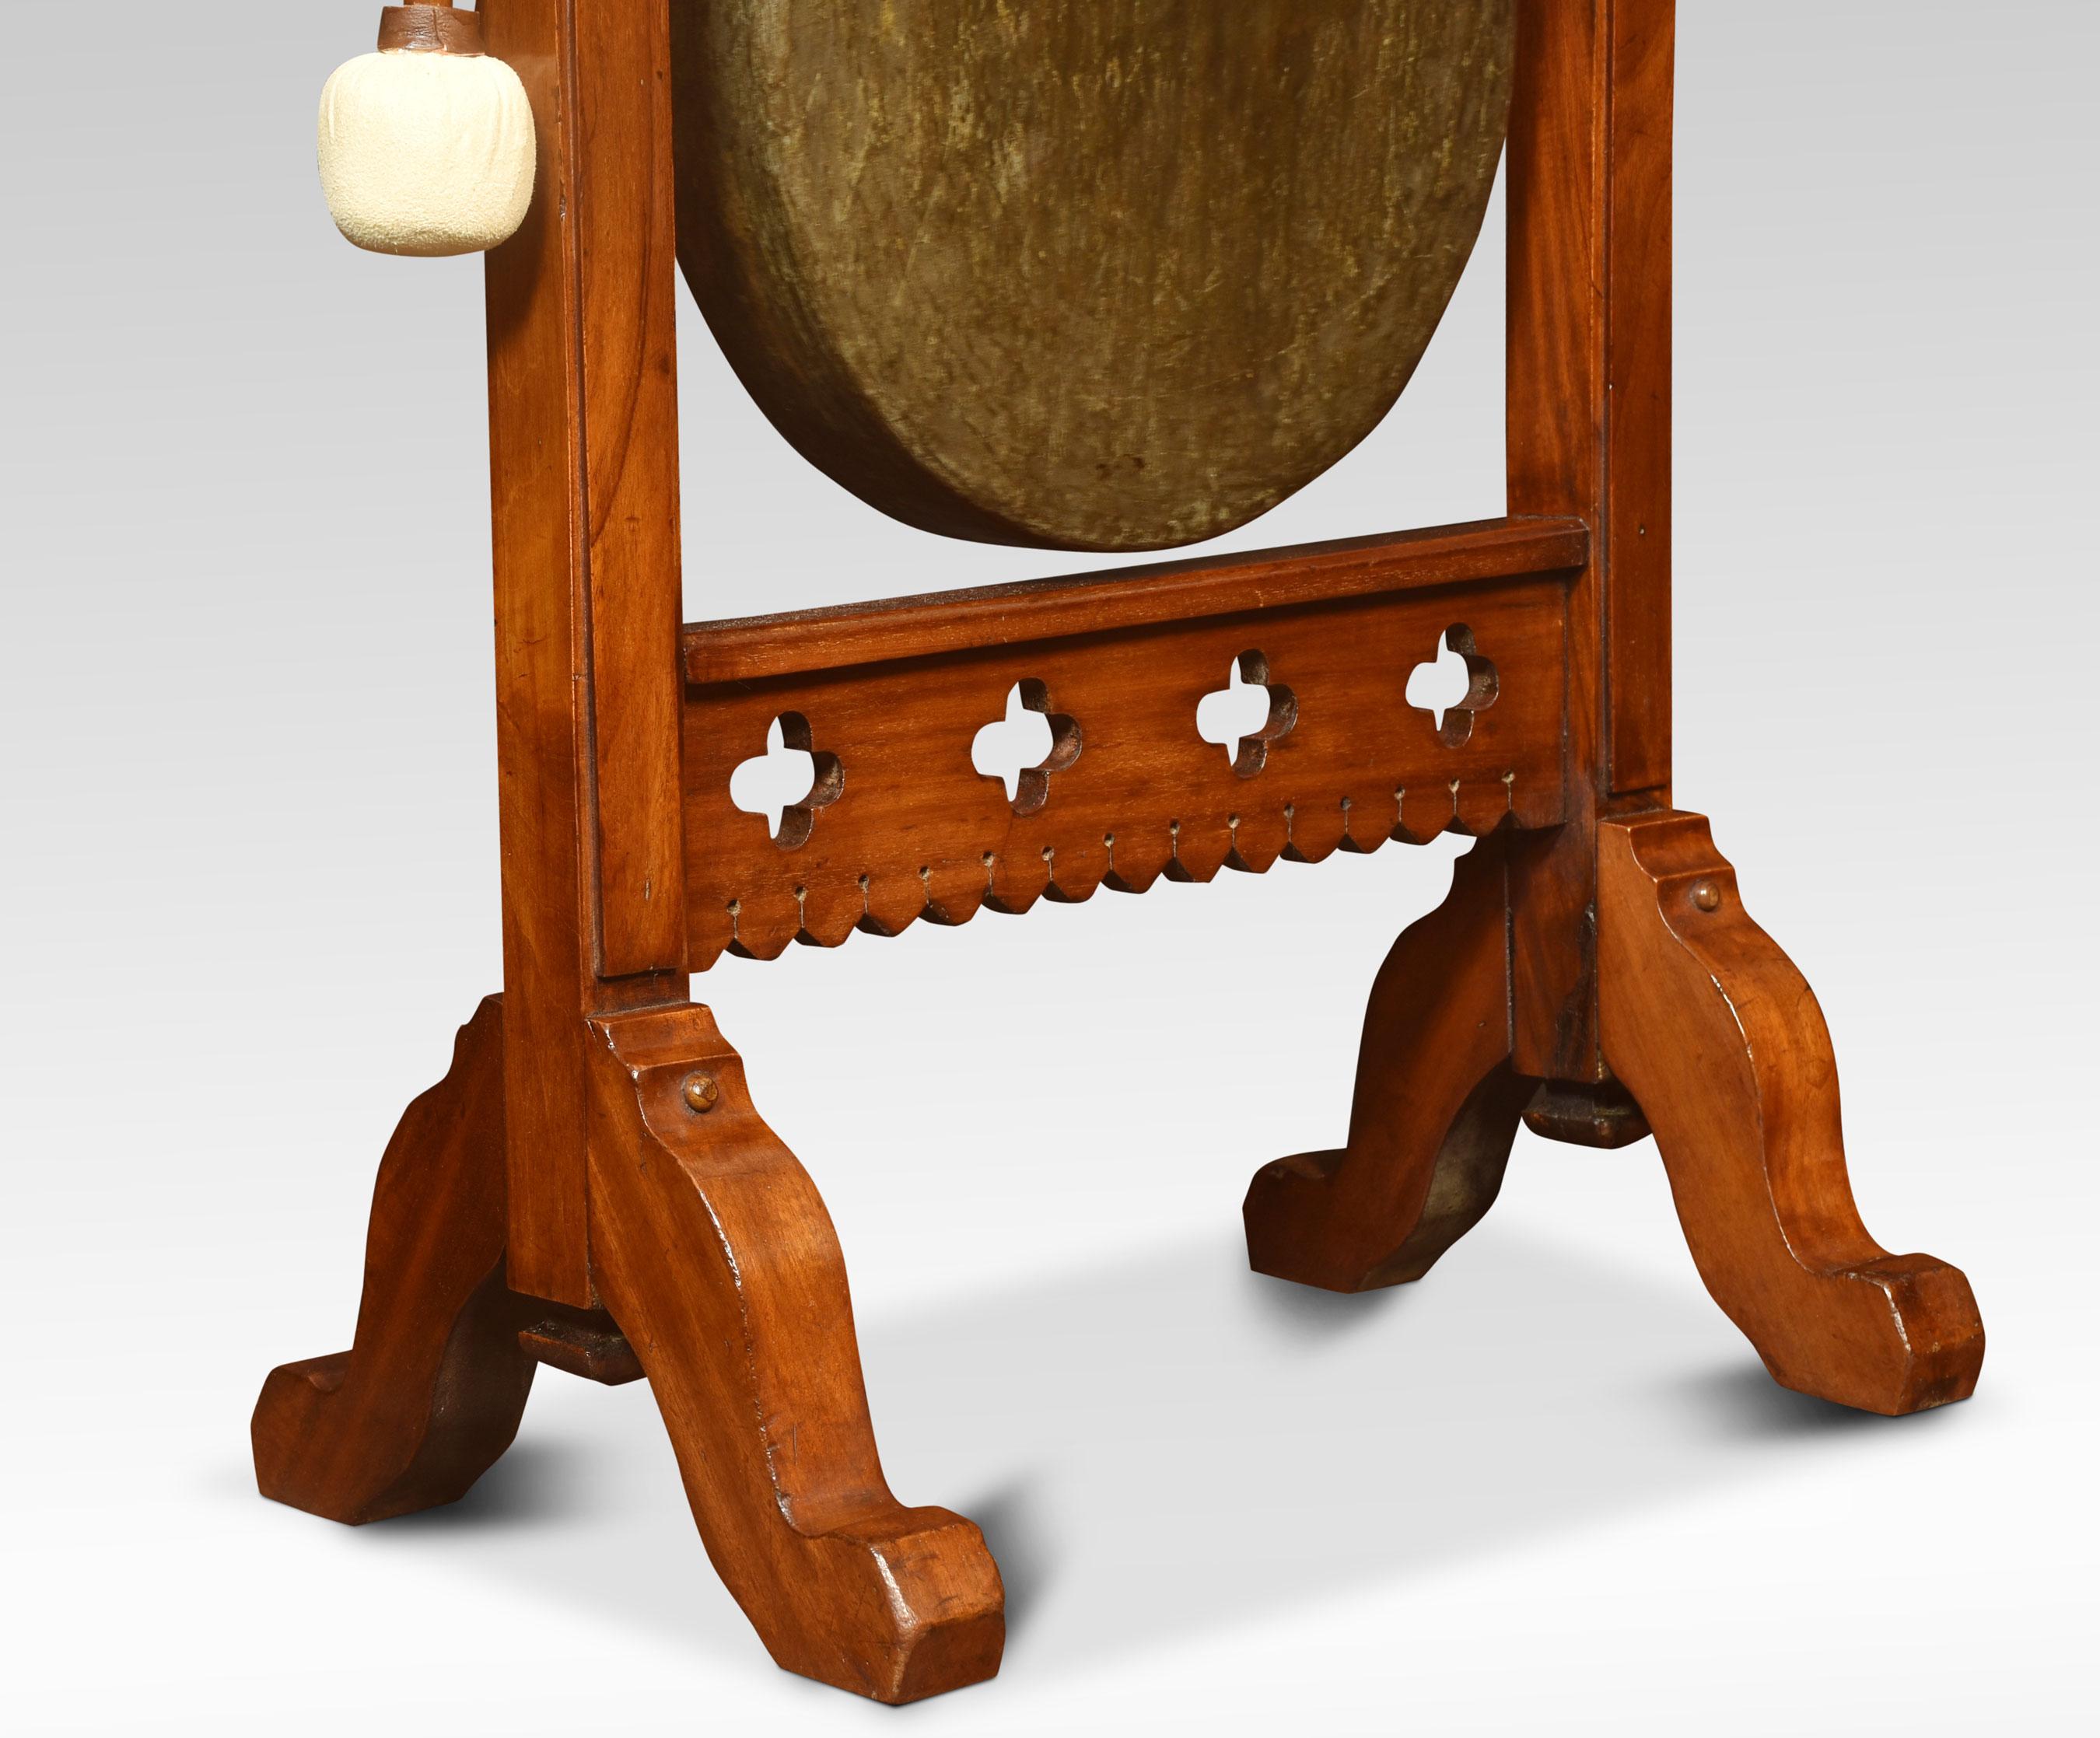 Gothic revival dinner gong, the carved walnut frame supporting the original brass gong. Together with beater.
Dimensions
Height 37.5 inches
Width 22 inches
Depth 14 inches.